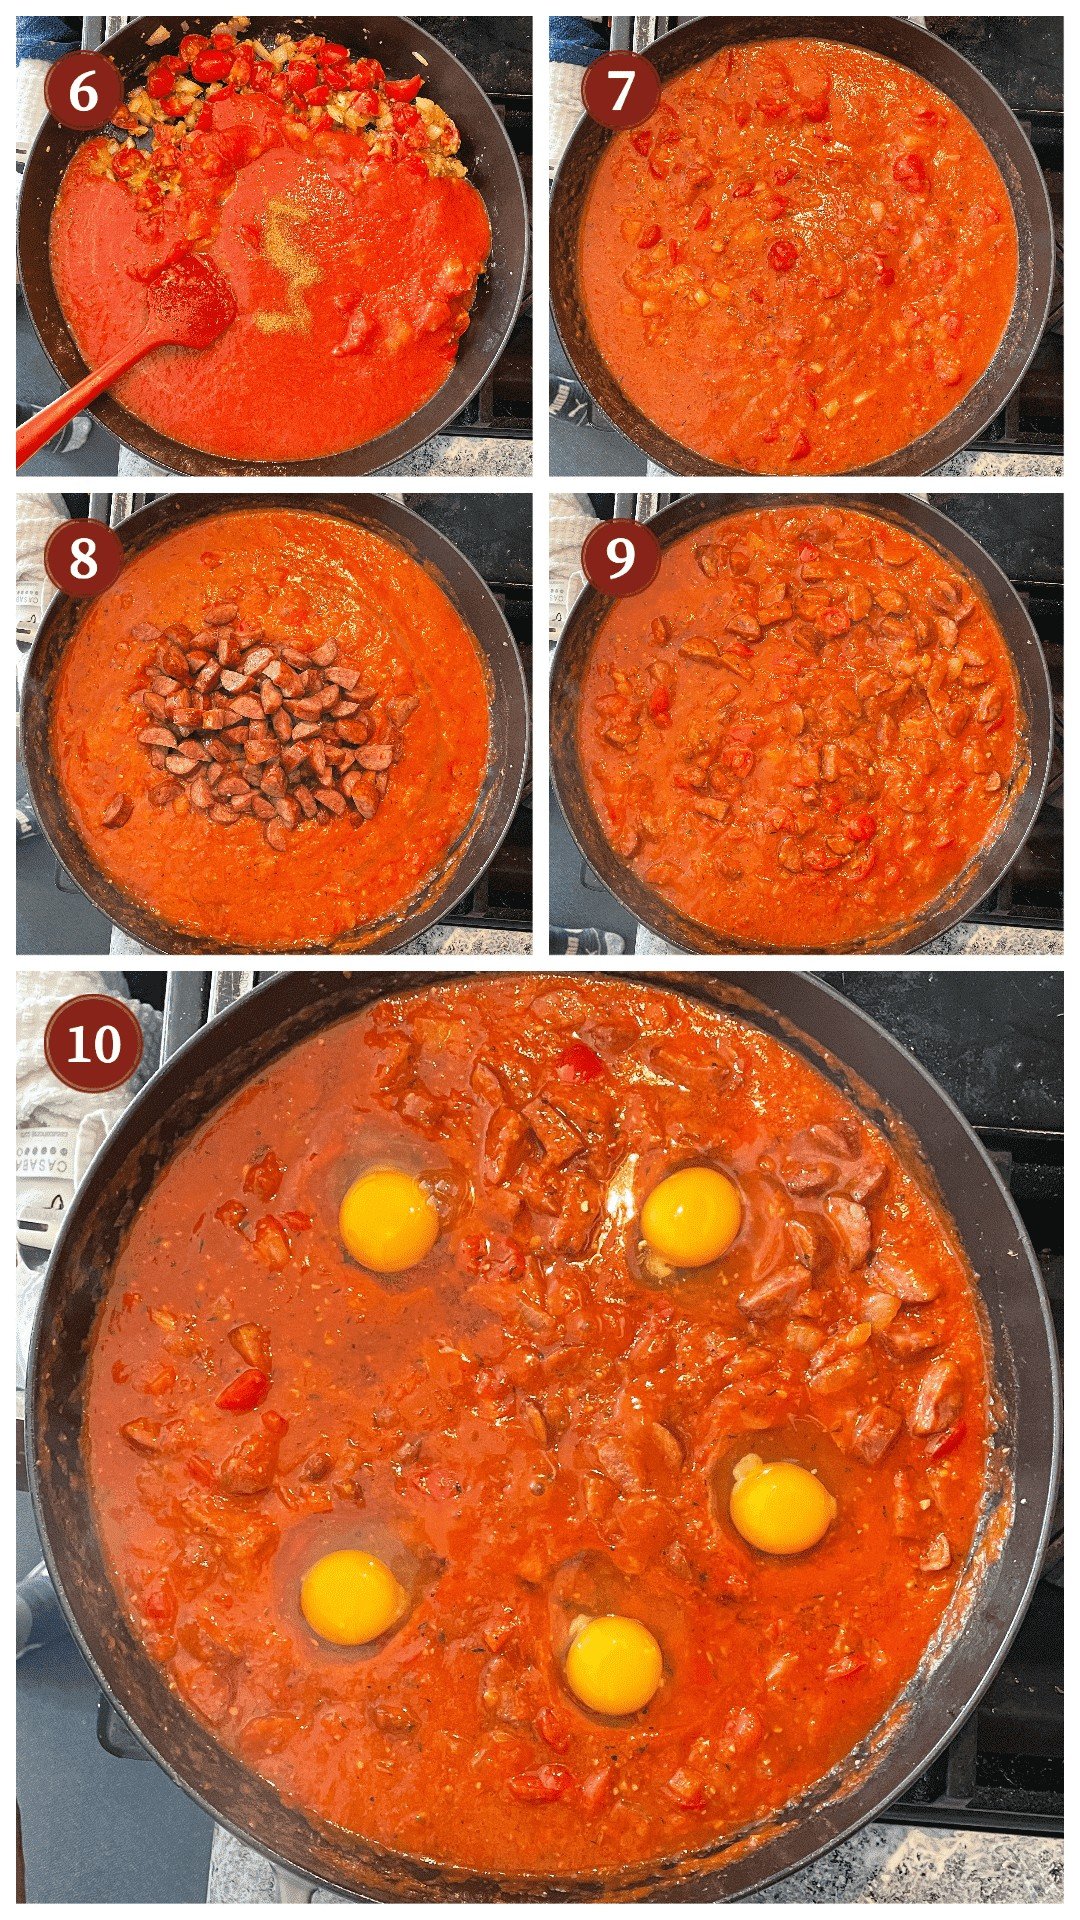 A collage of images showing how to make creole shakshuka, steps 5 - 10.